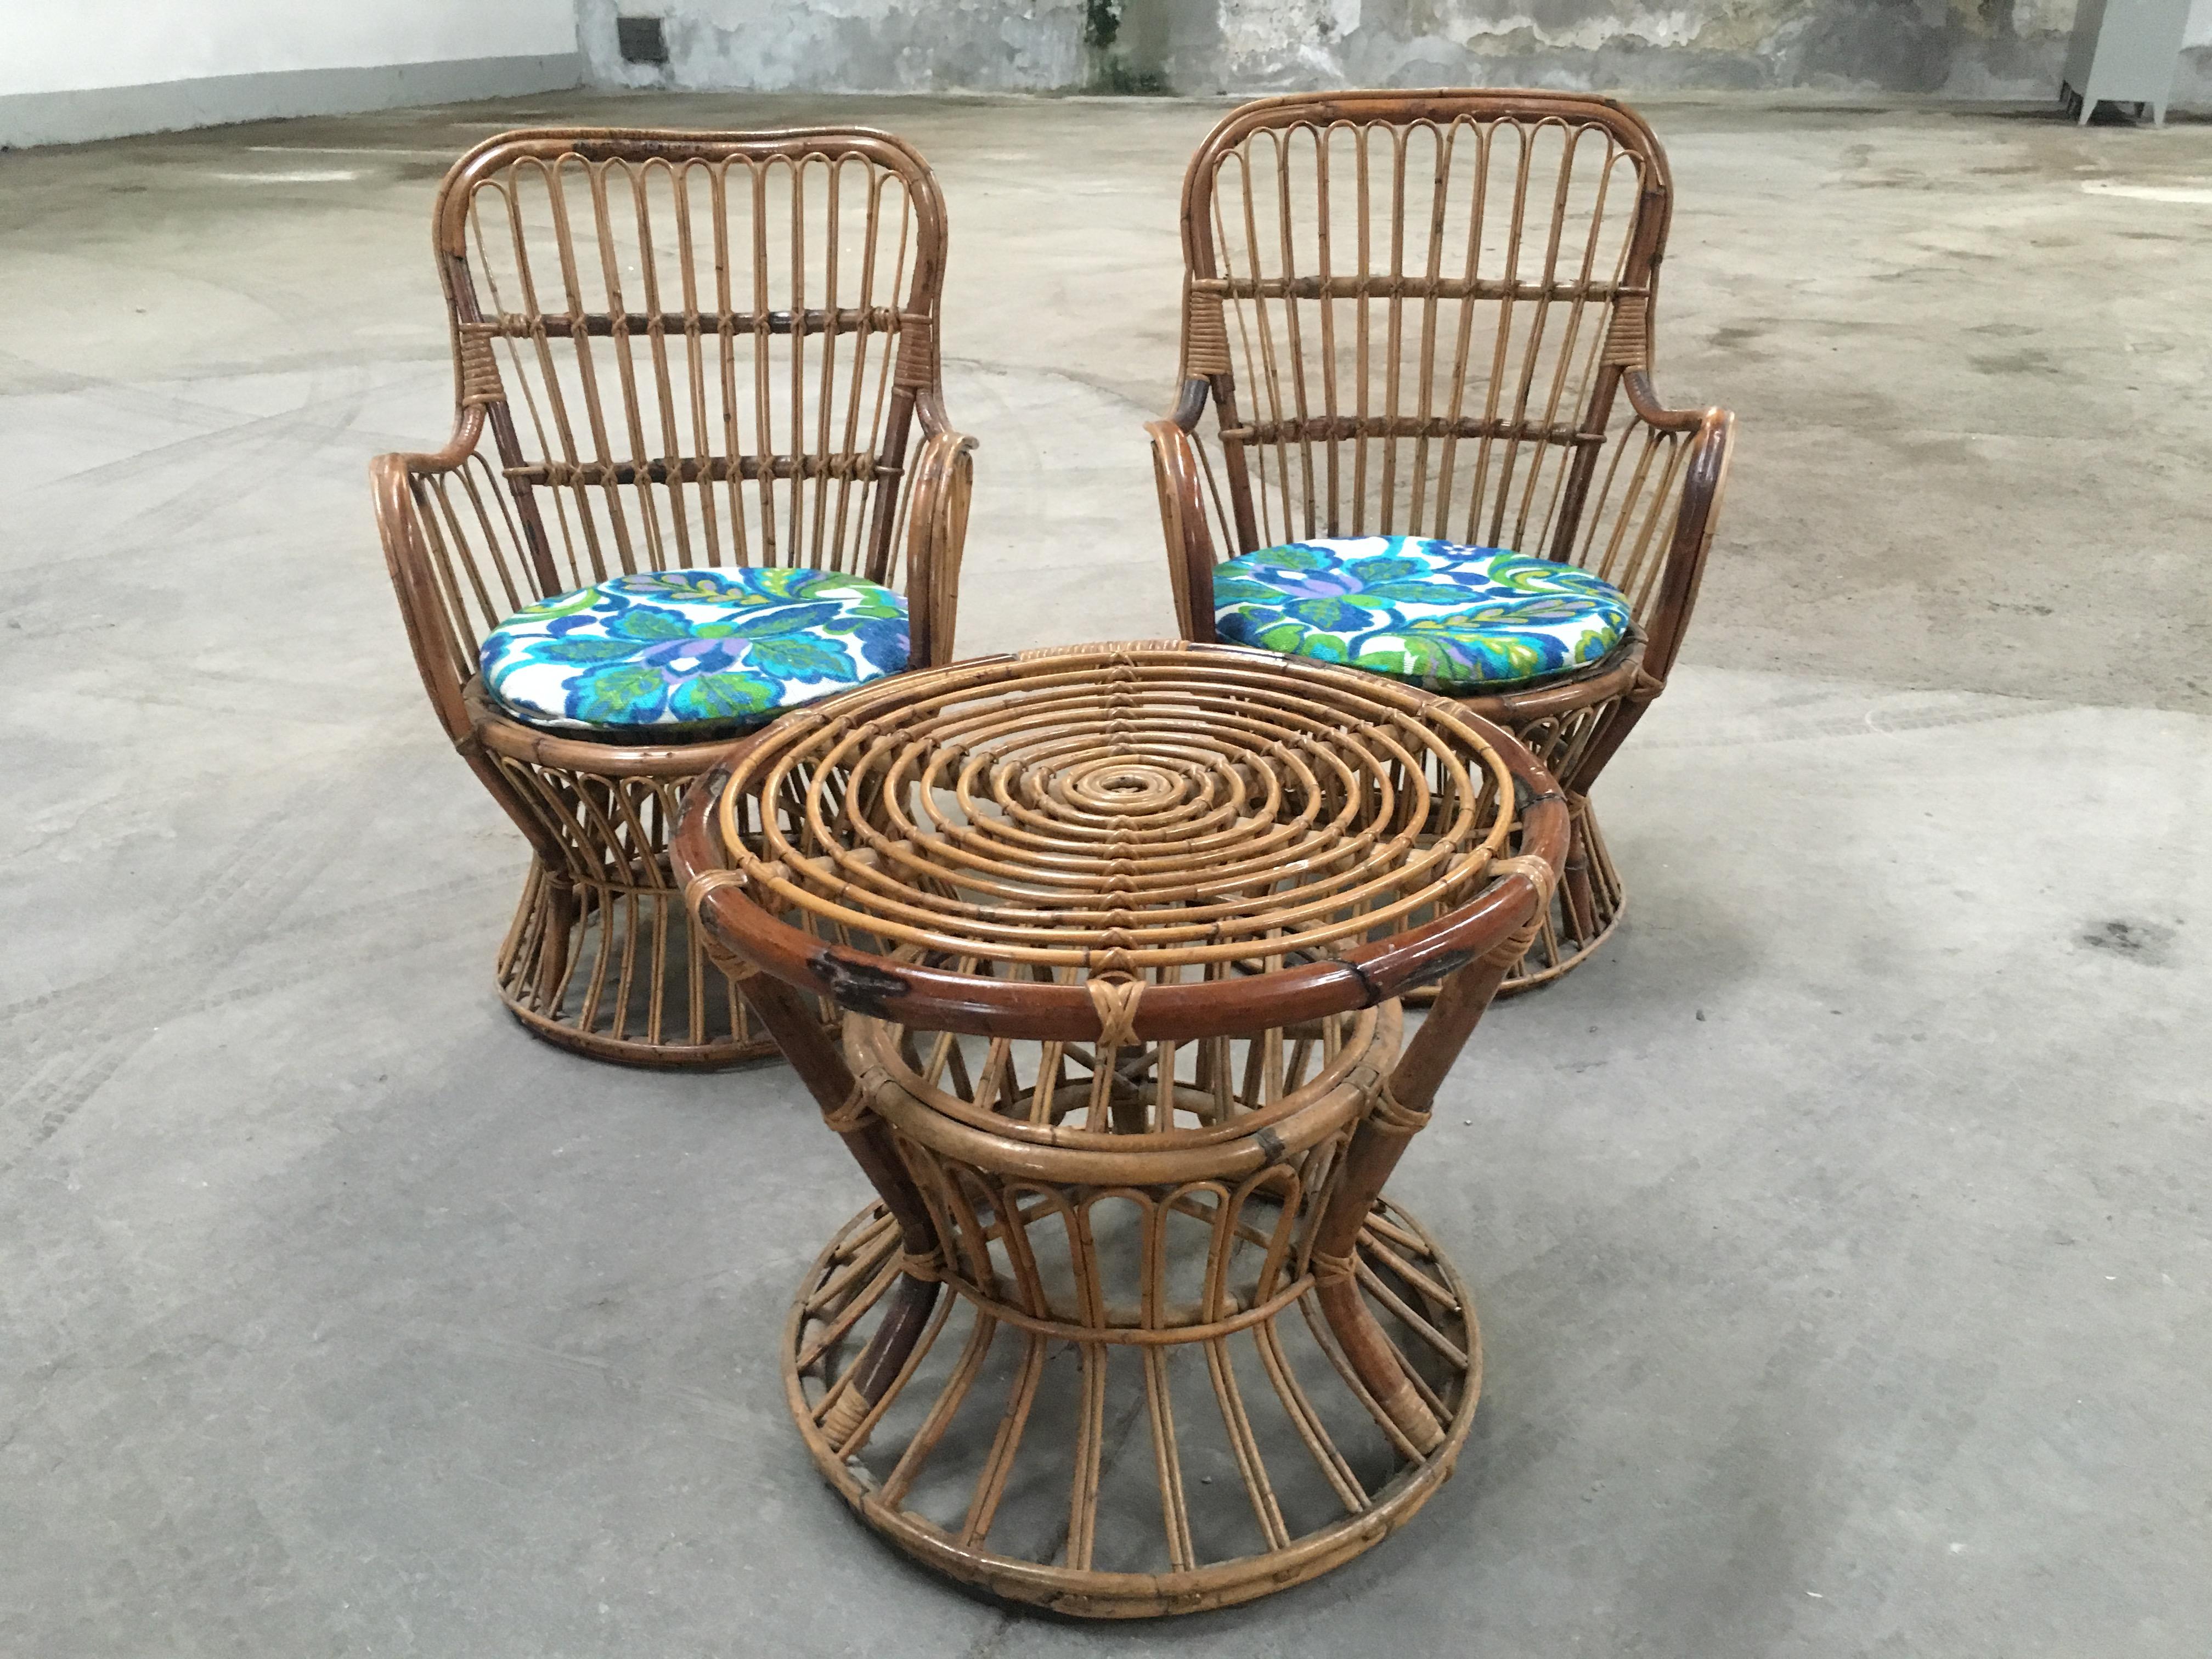 Italian bamboo and rattan living room set from 1950s composed by a pair of armchairs with vintage floral fabric cushions and a side table
Measurements:
Armchairs: cm 55 x cm 50 x height cm 83 (Seat Height cm.38)
Side table: Diameter cm 60 x